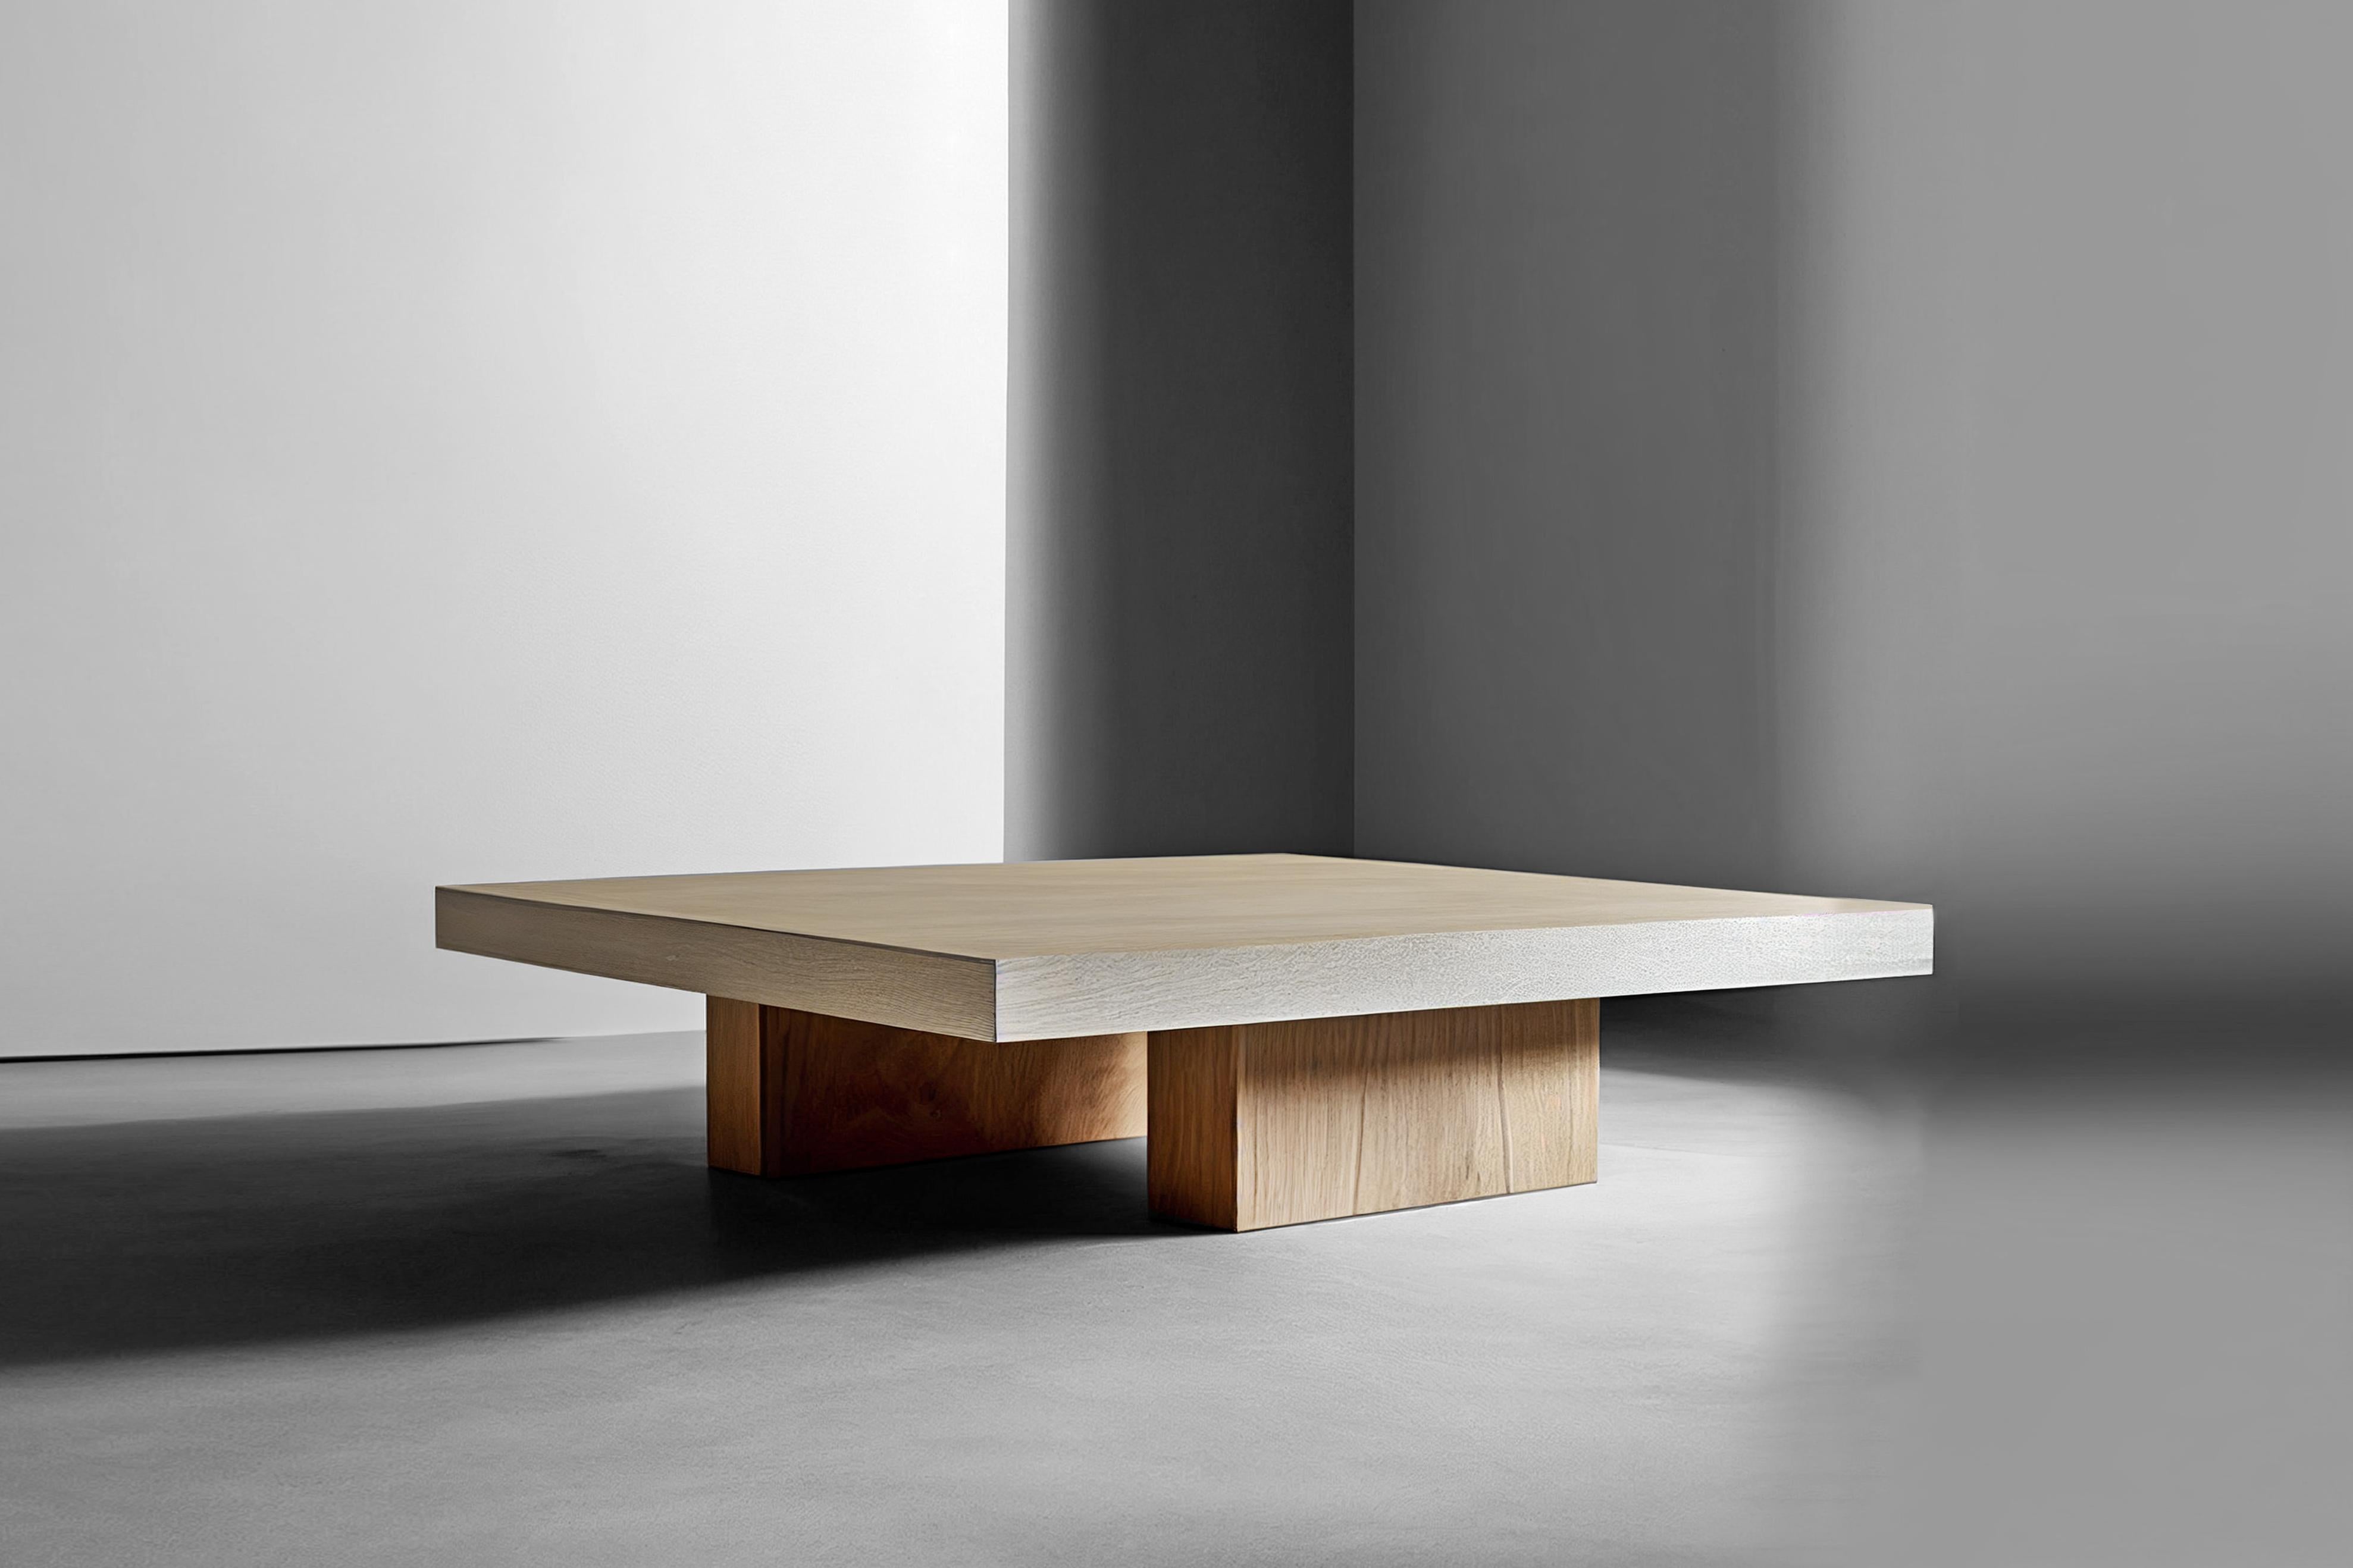 Coffee table made of solid oak wood. All the pieces are coated with polyurethane with a semi-matt finish.
—
NONO is a Mexican design brand with more than 10 years of experience dedicated to the production of interior furnishings, editions, and